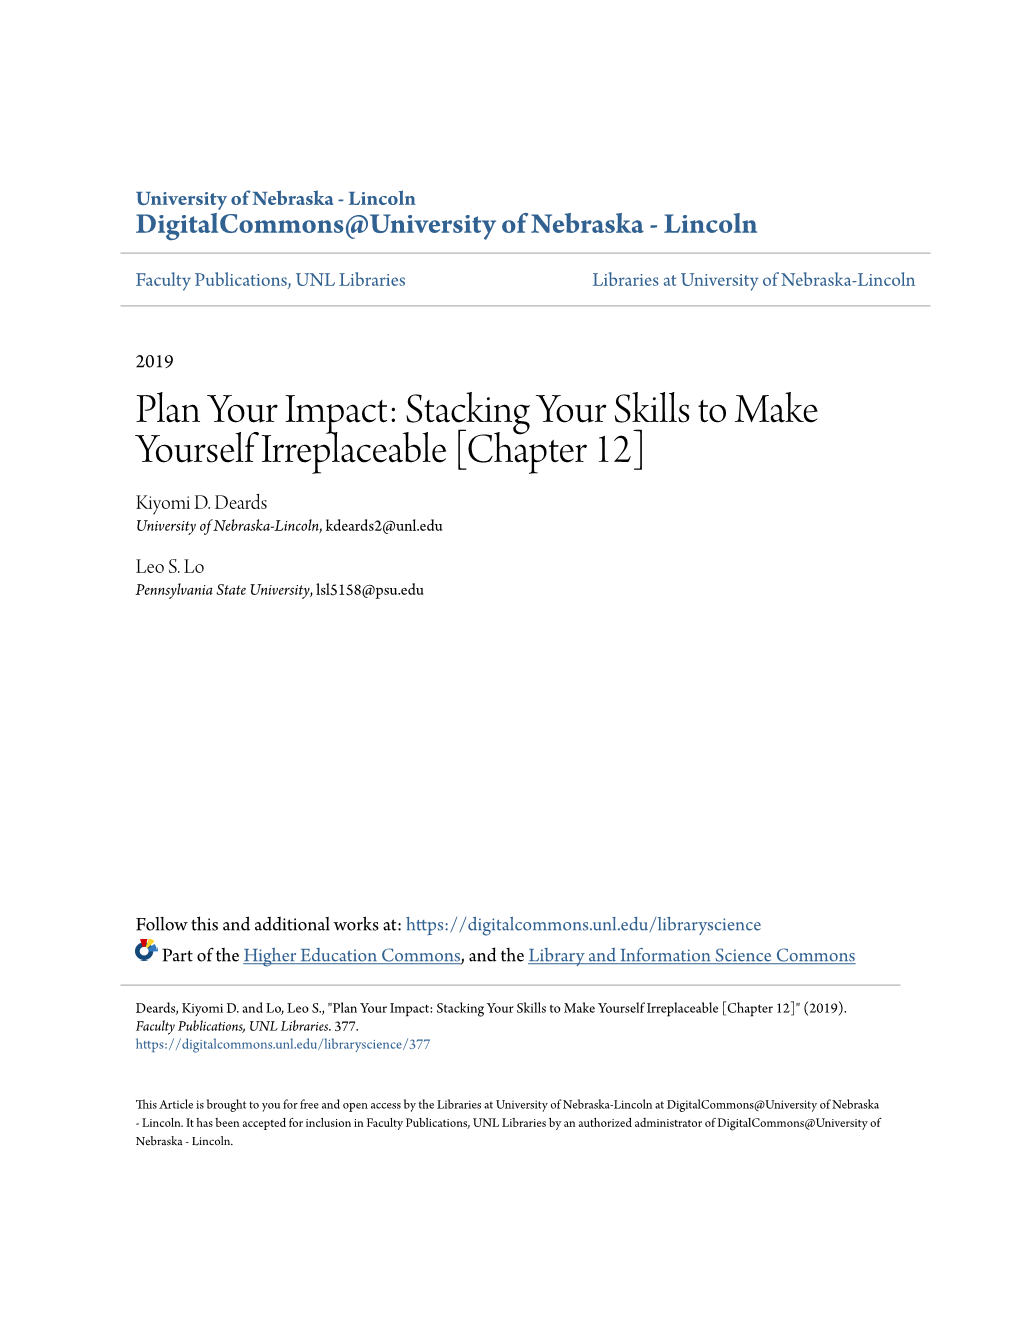 Plan Your Impact: Stacking Your Skills to Make Yourself Irreplaceable [Chapter 12] Kiyomi D